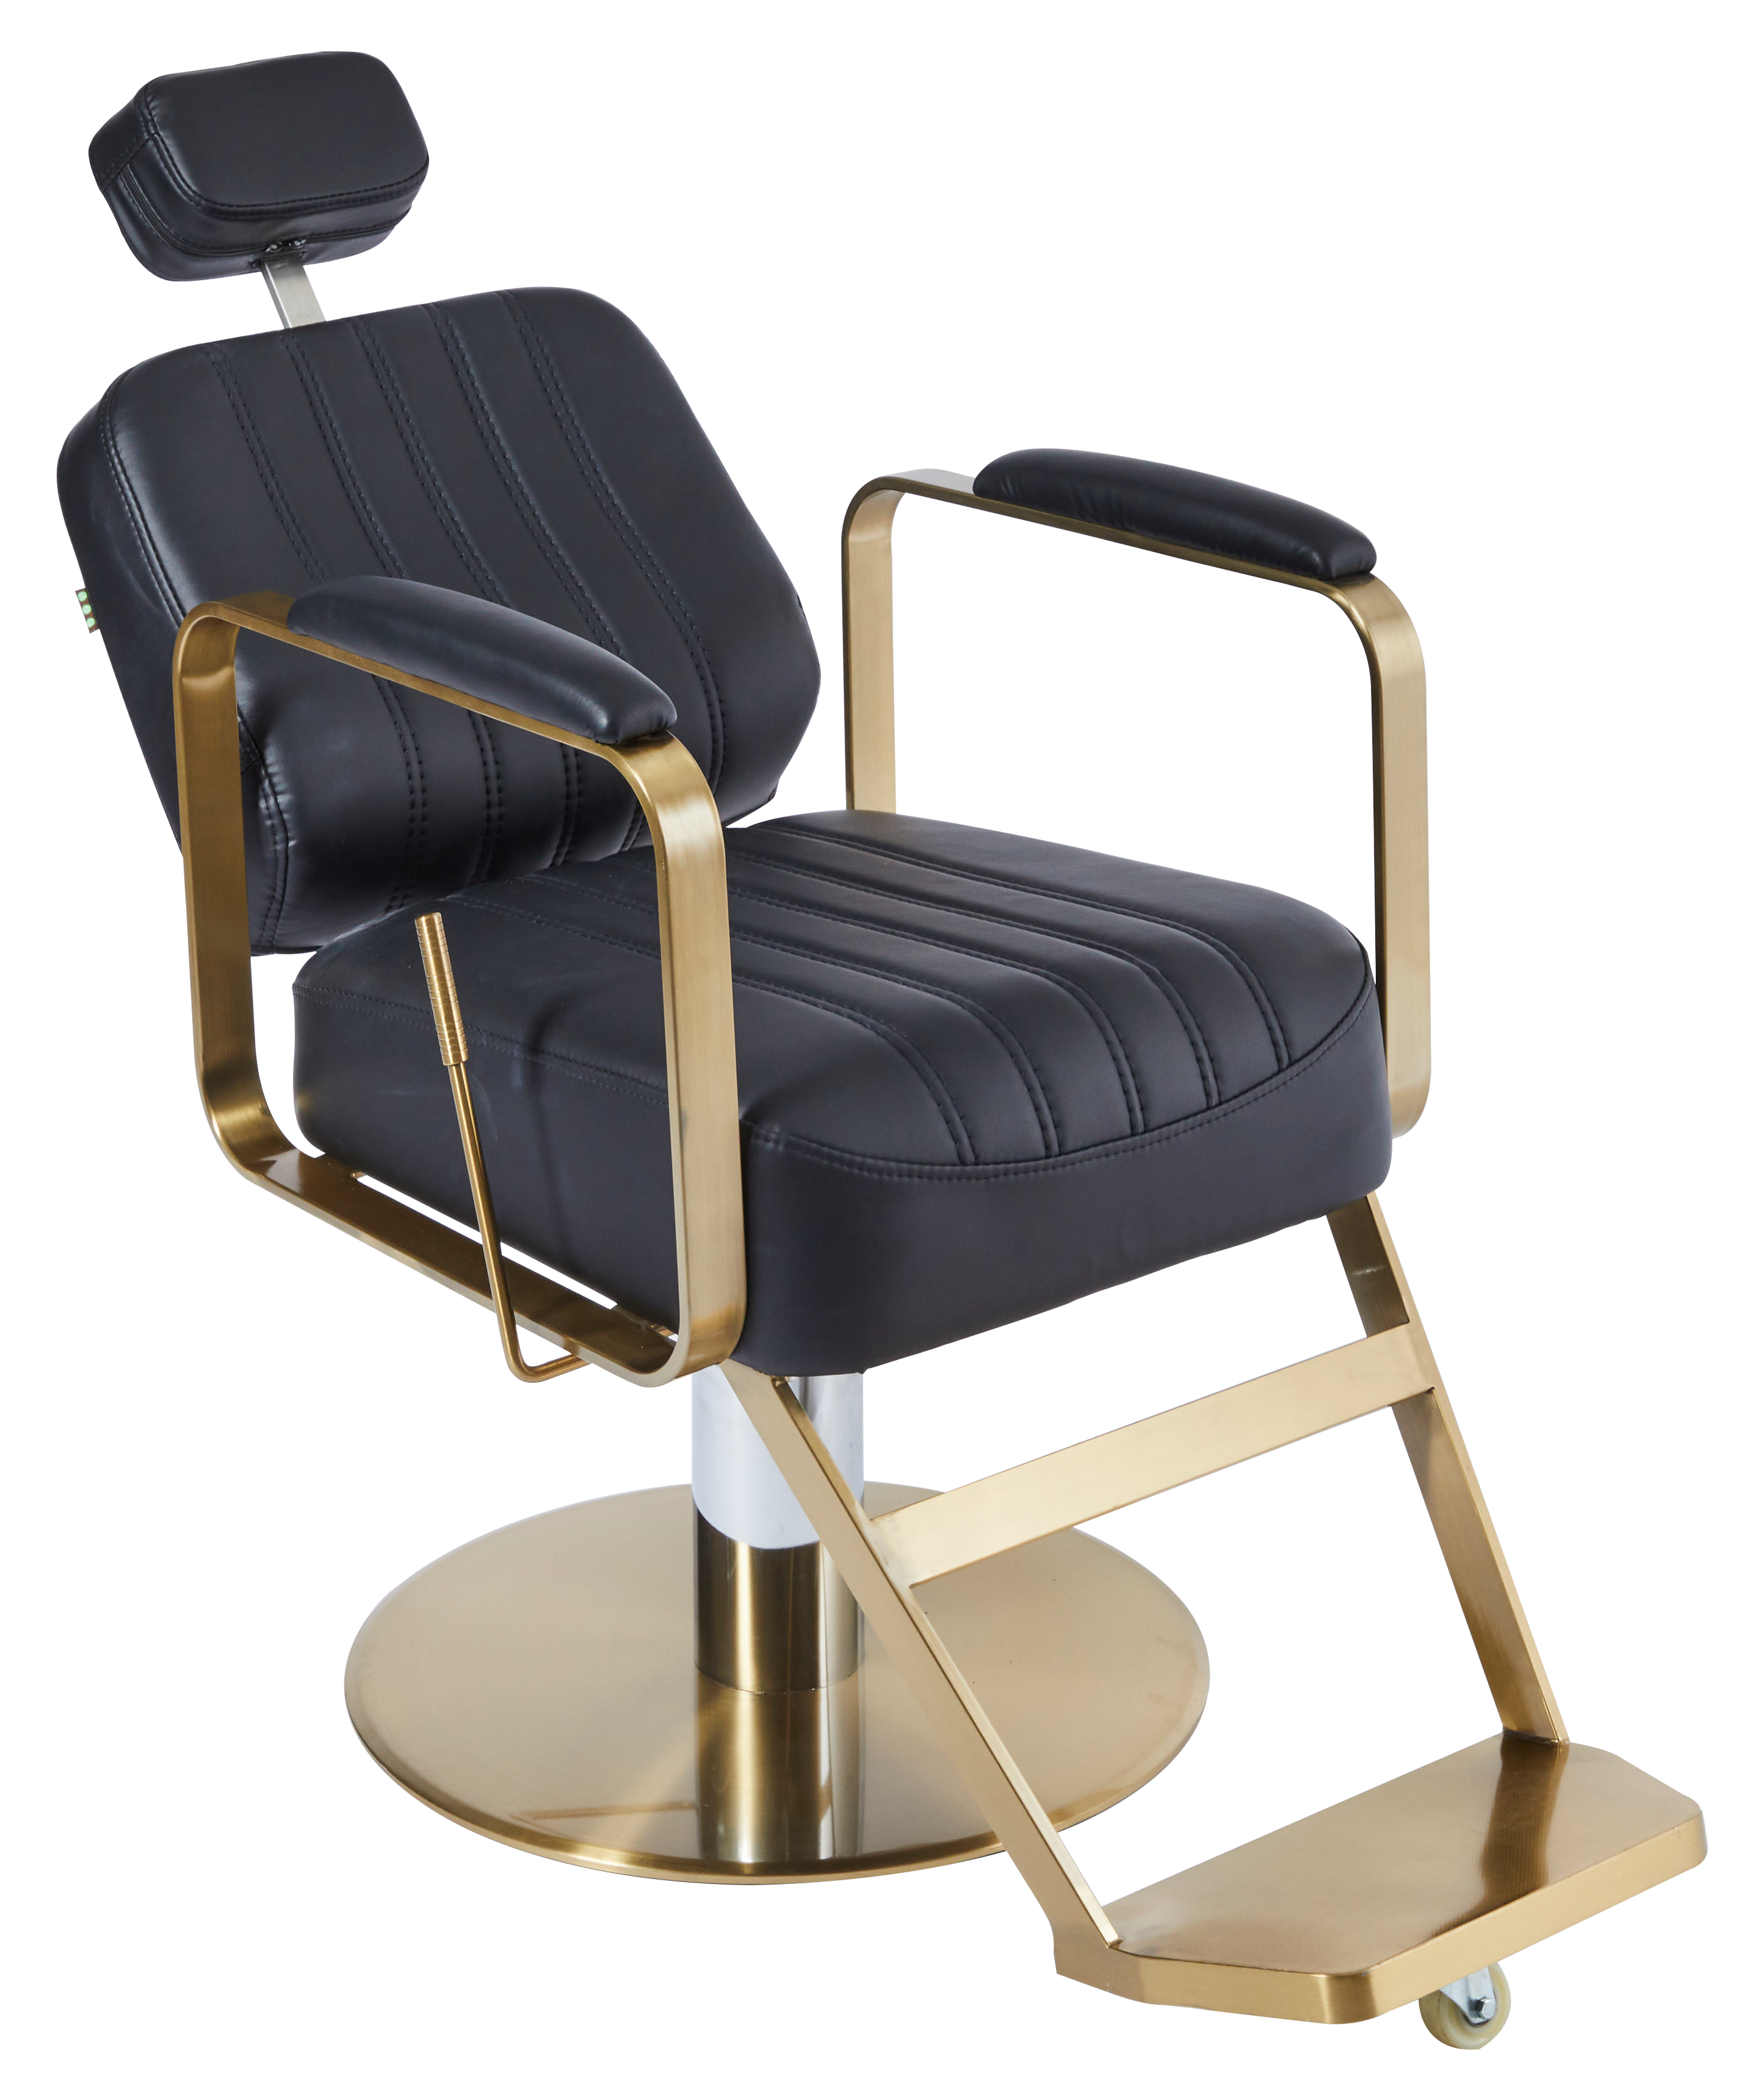 The Lexi Reclining Chair - Black & Gold by SEC